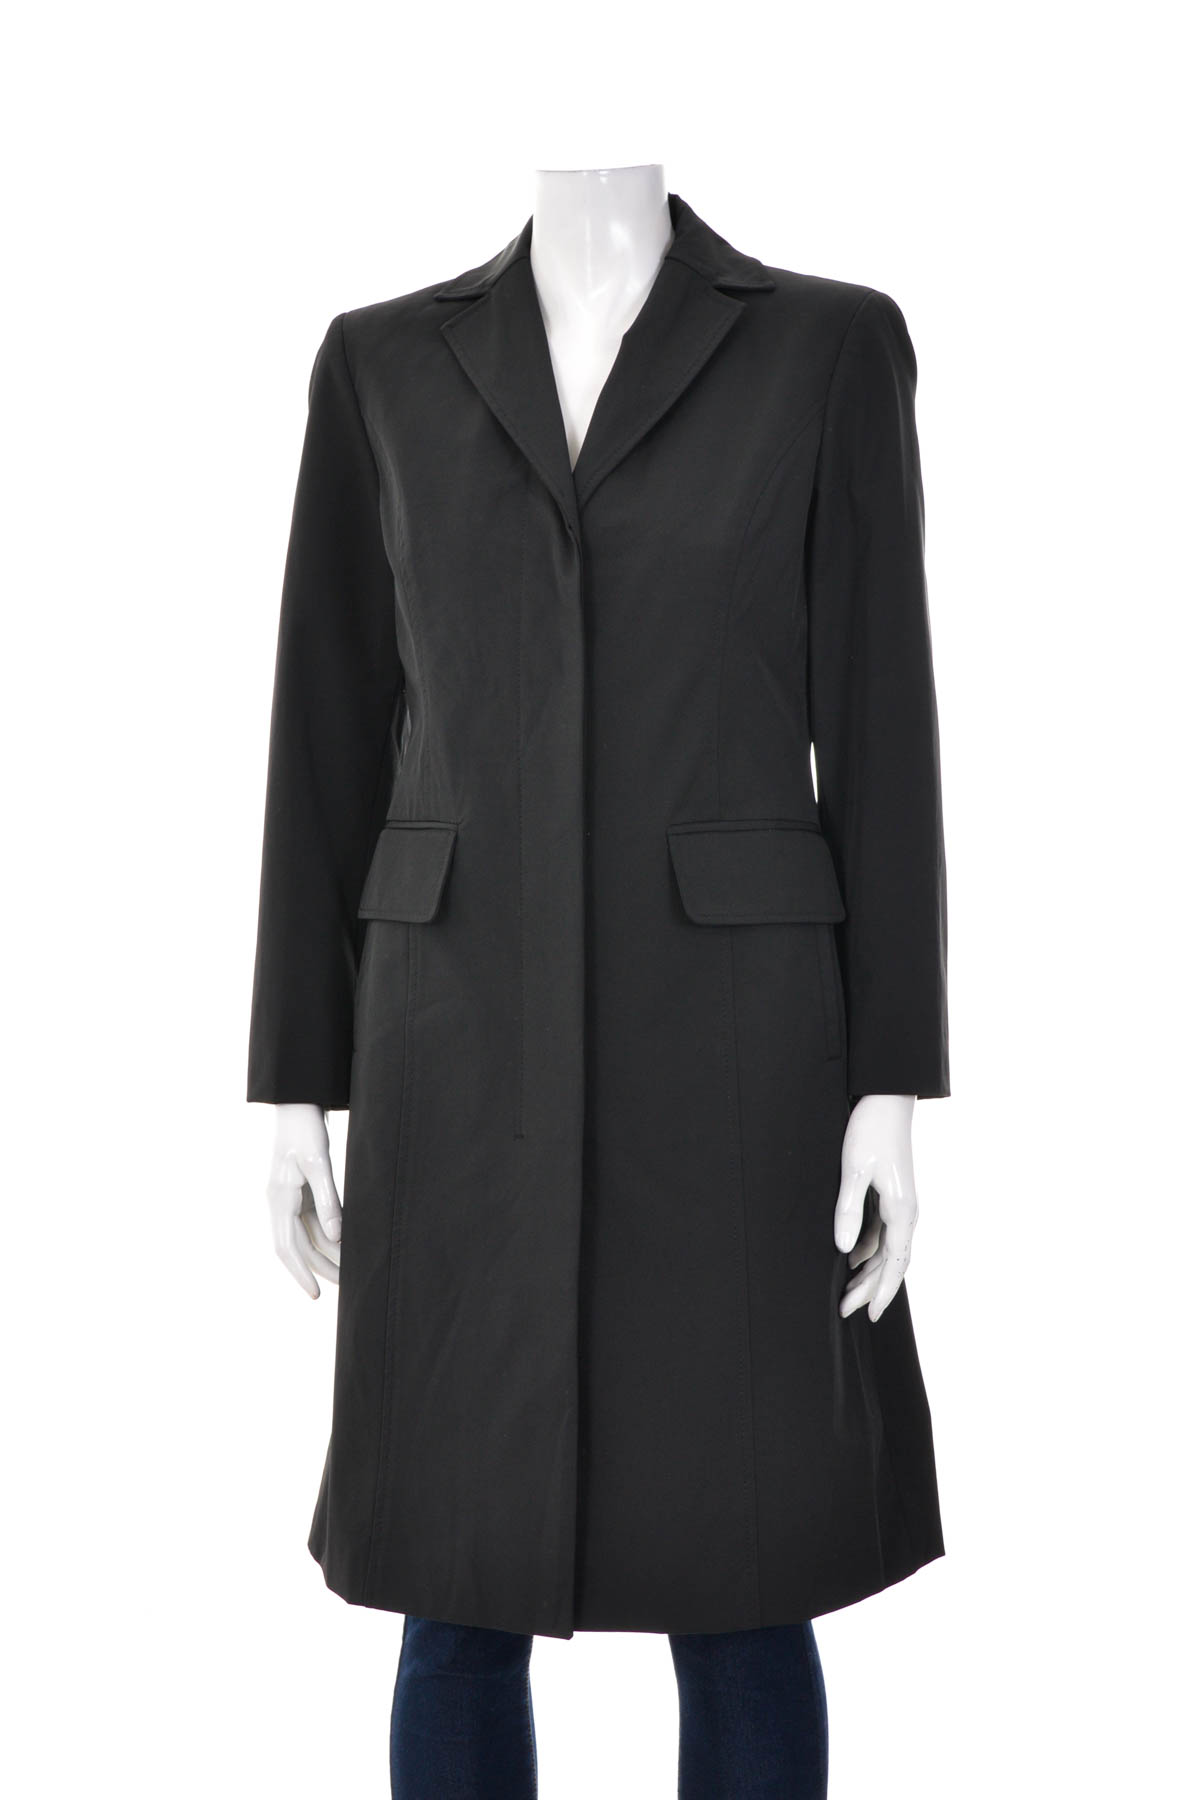 Ladies' Trench Coat - ANN TAYLOR - 0